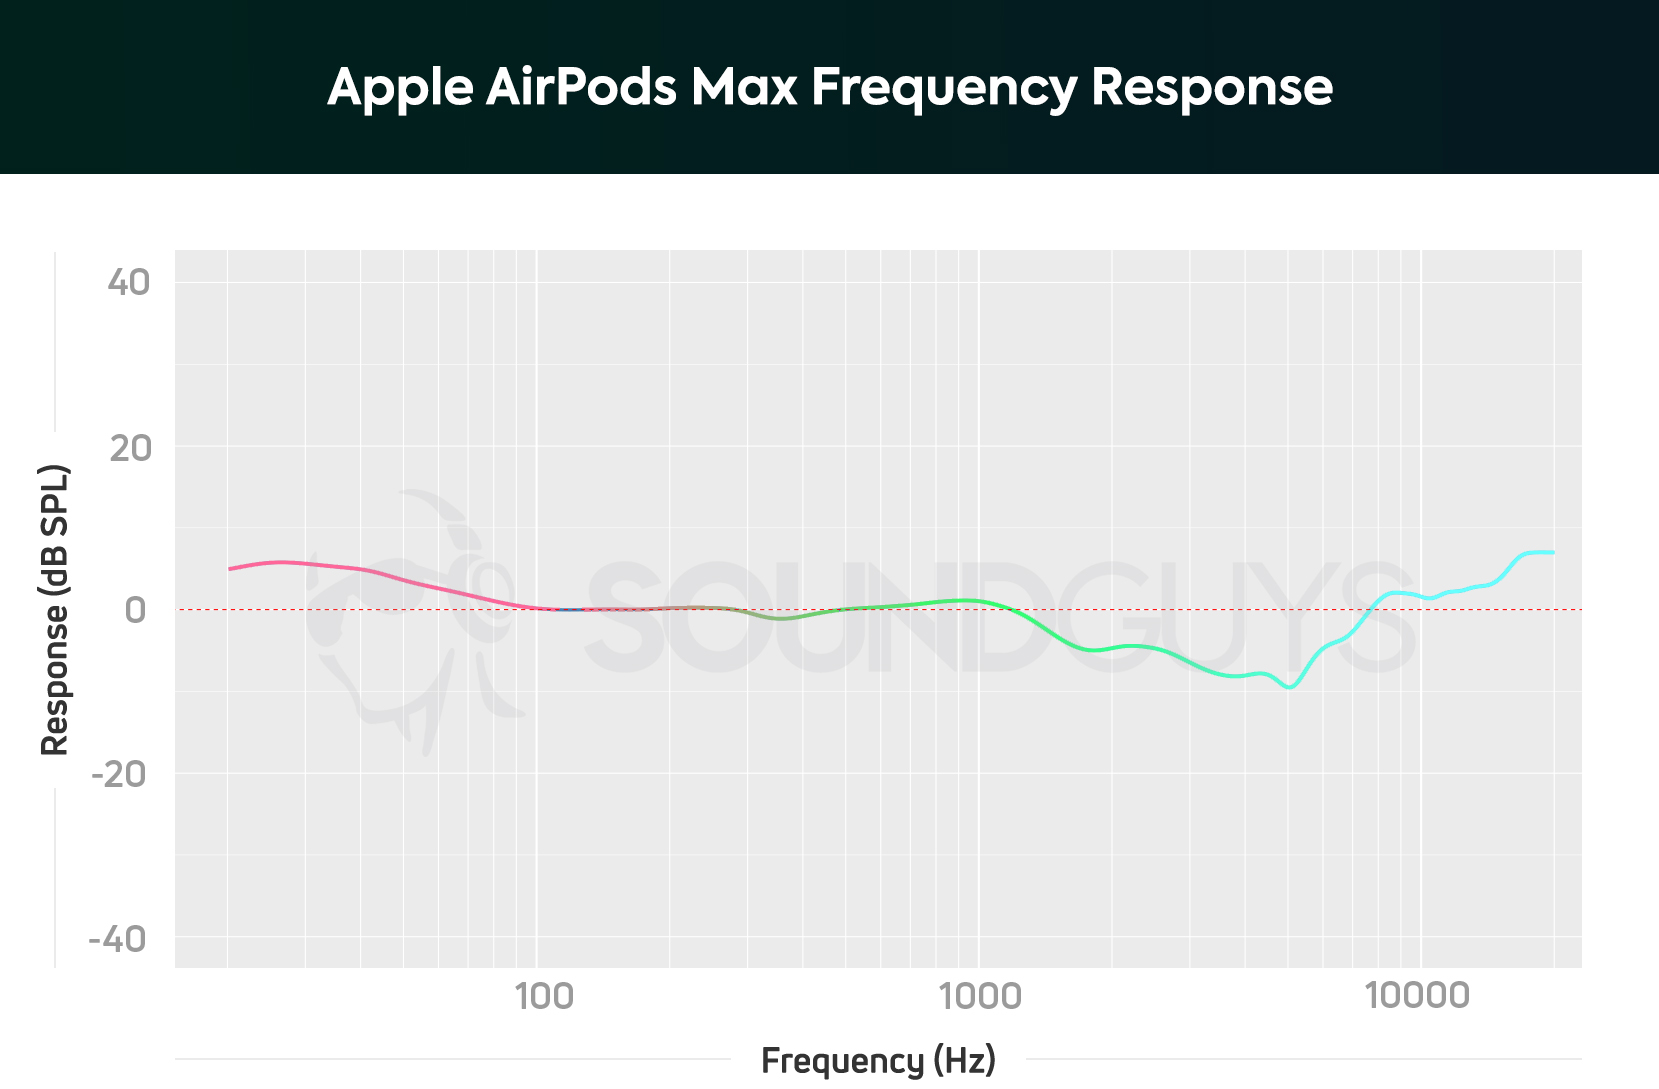 Apple AirPods Max frequency response chart